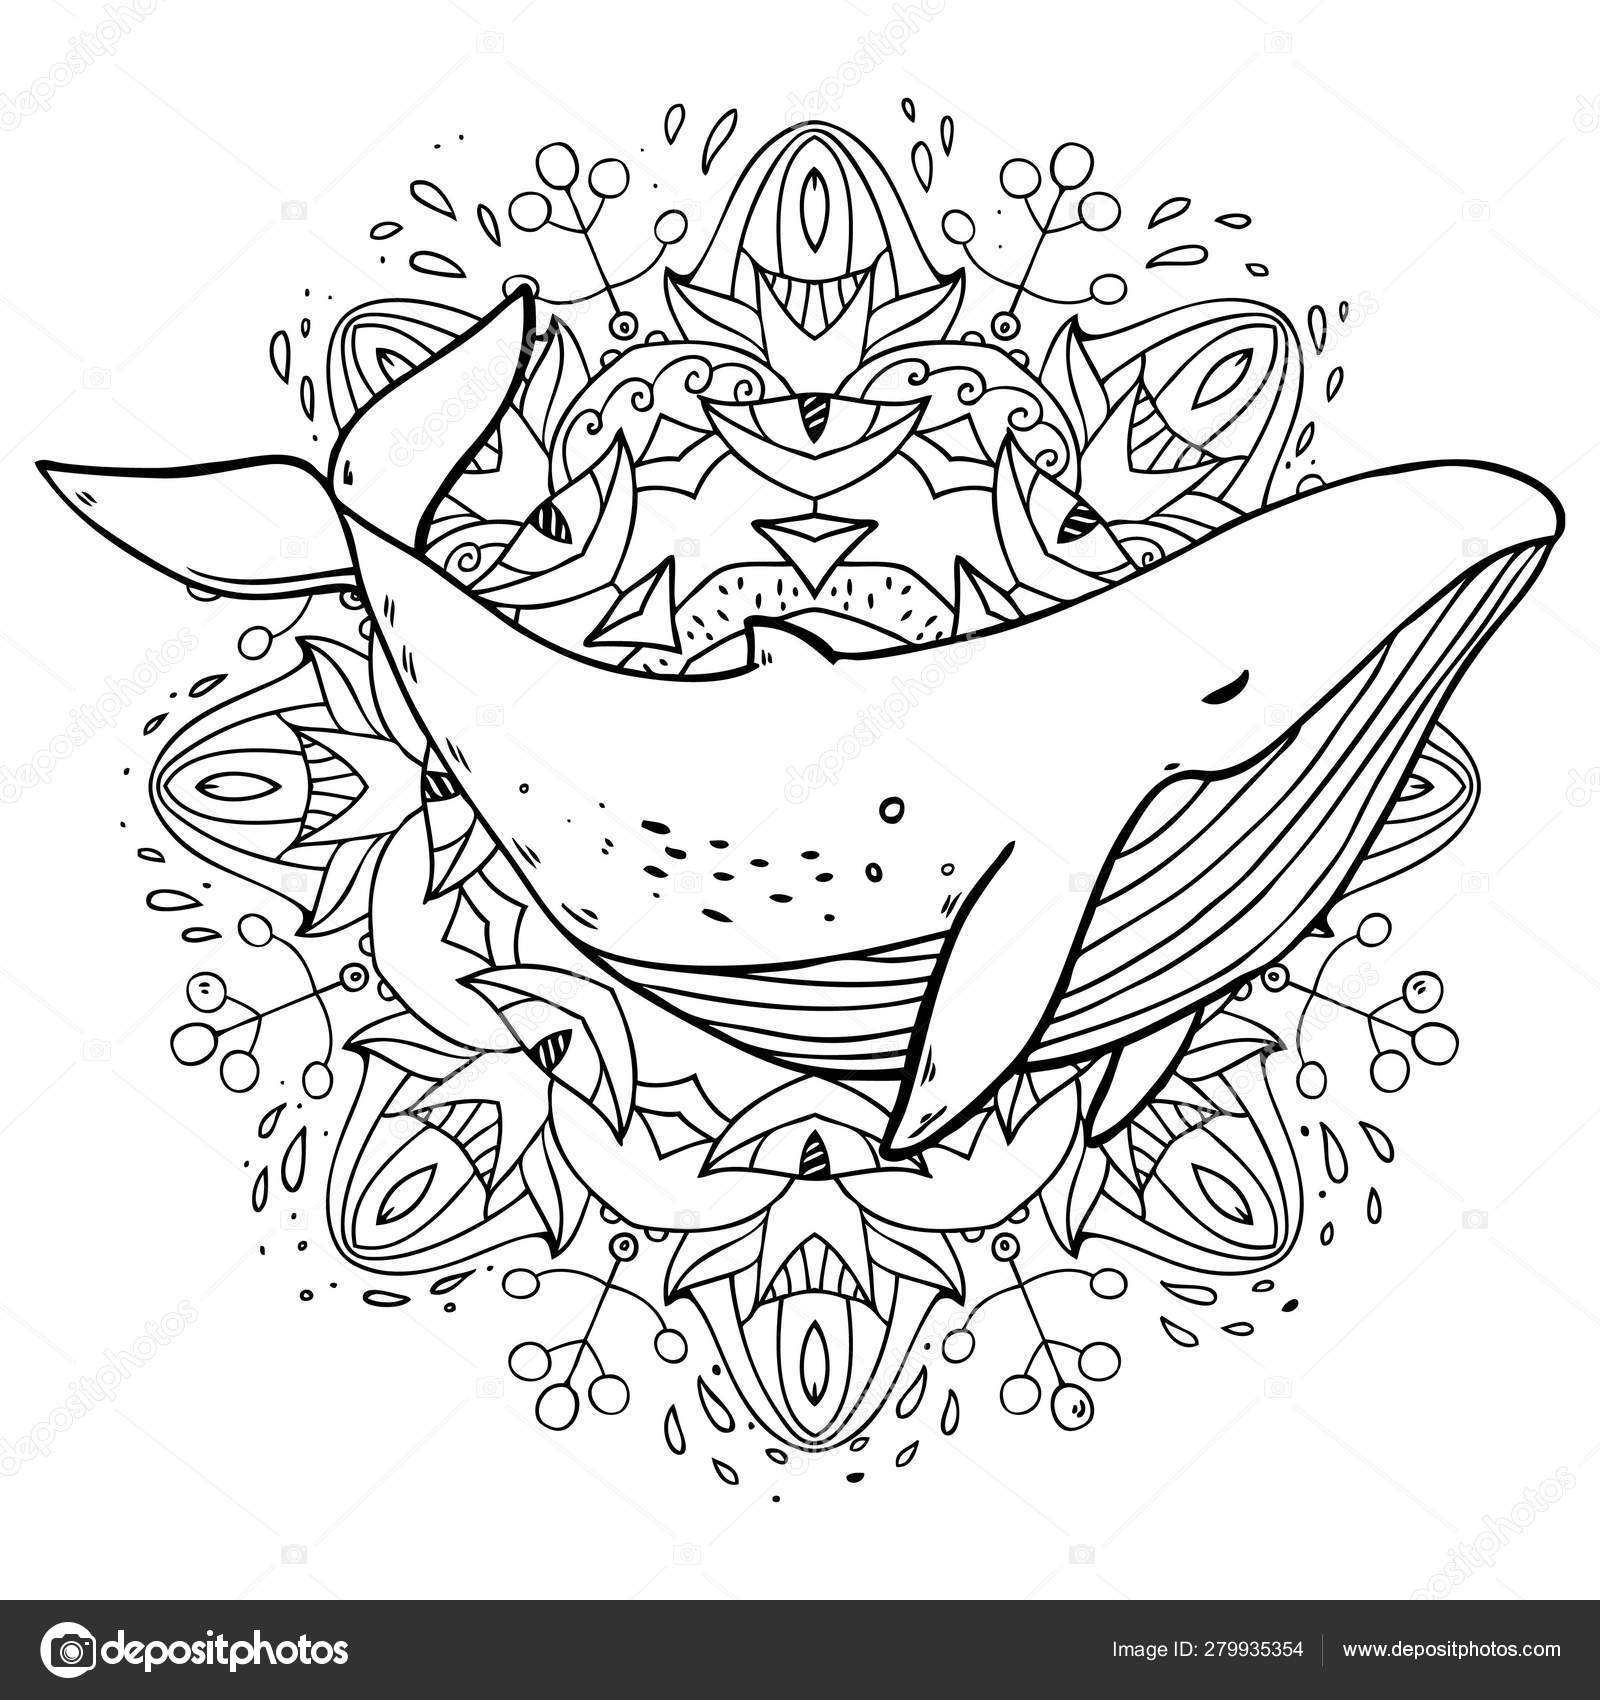 Whale abstract background pattern coloring book stock vector by lunter